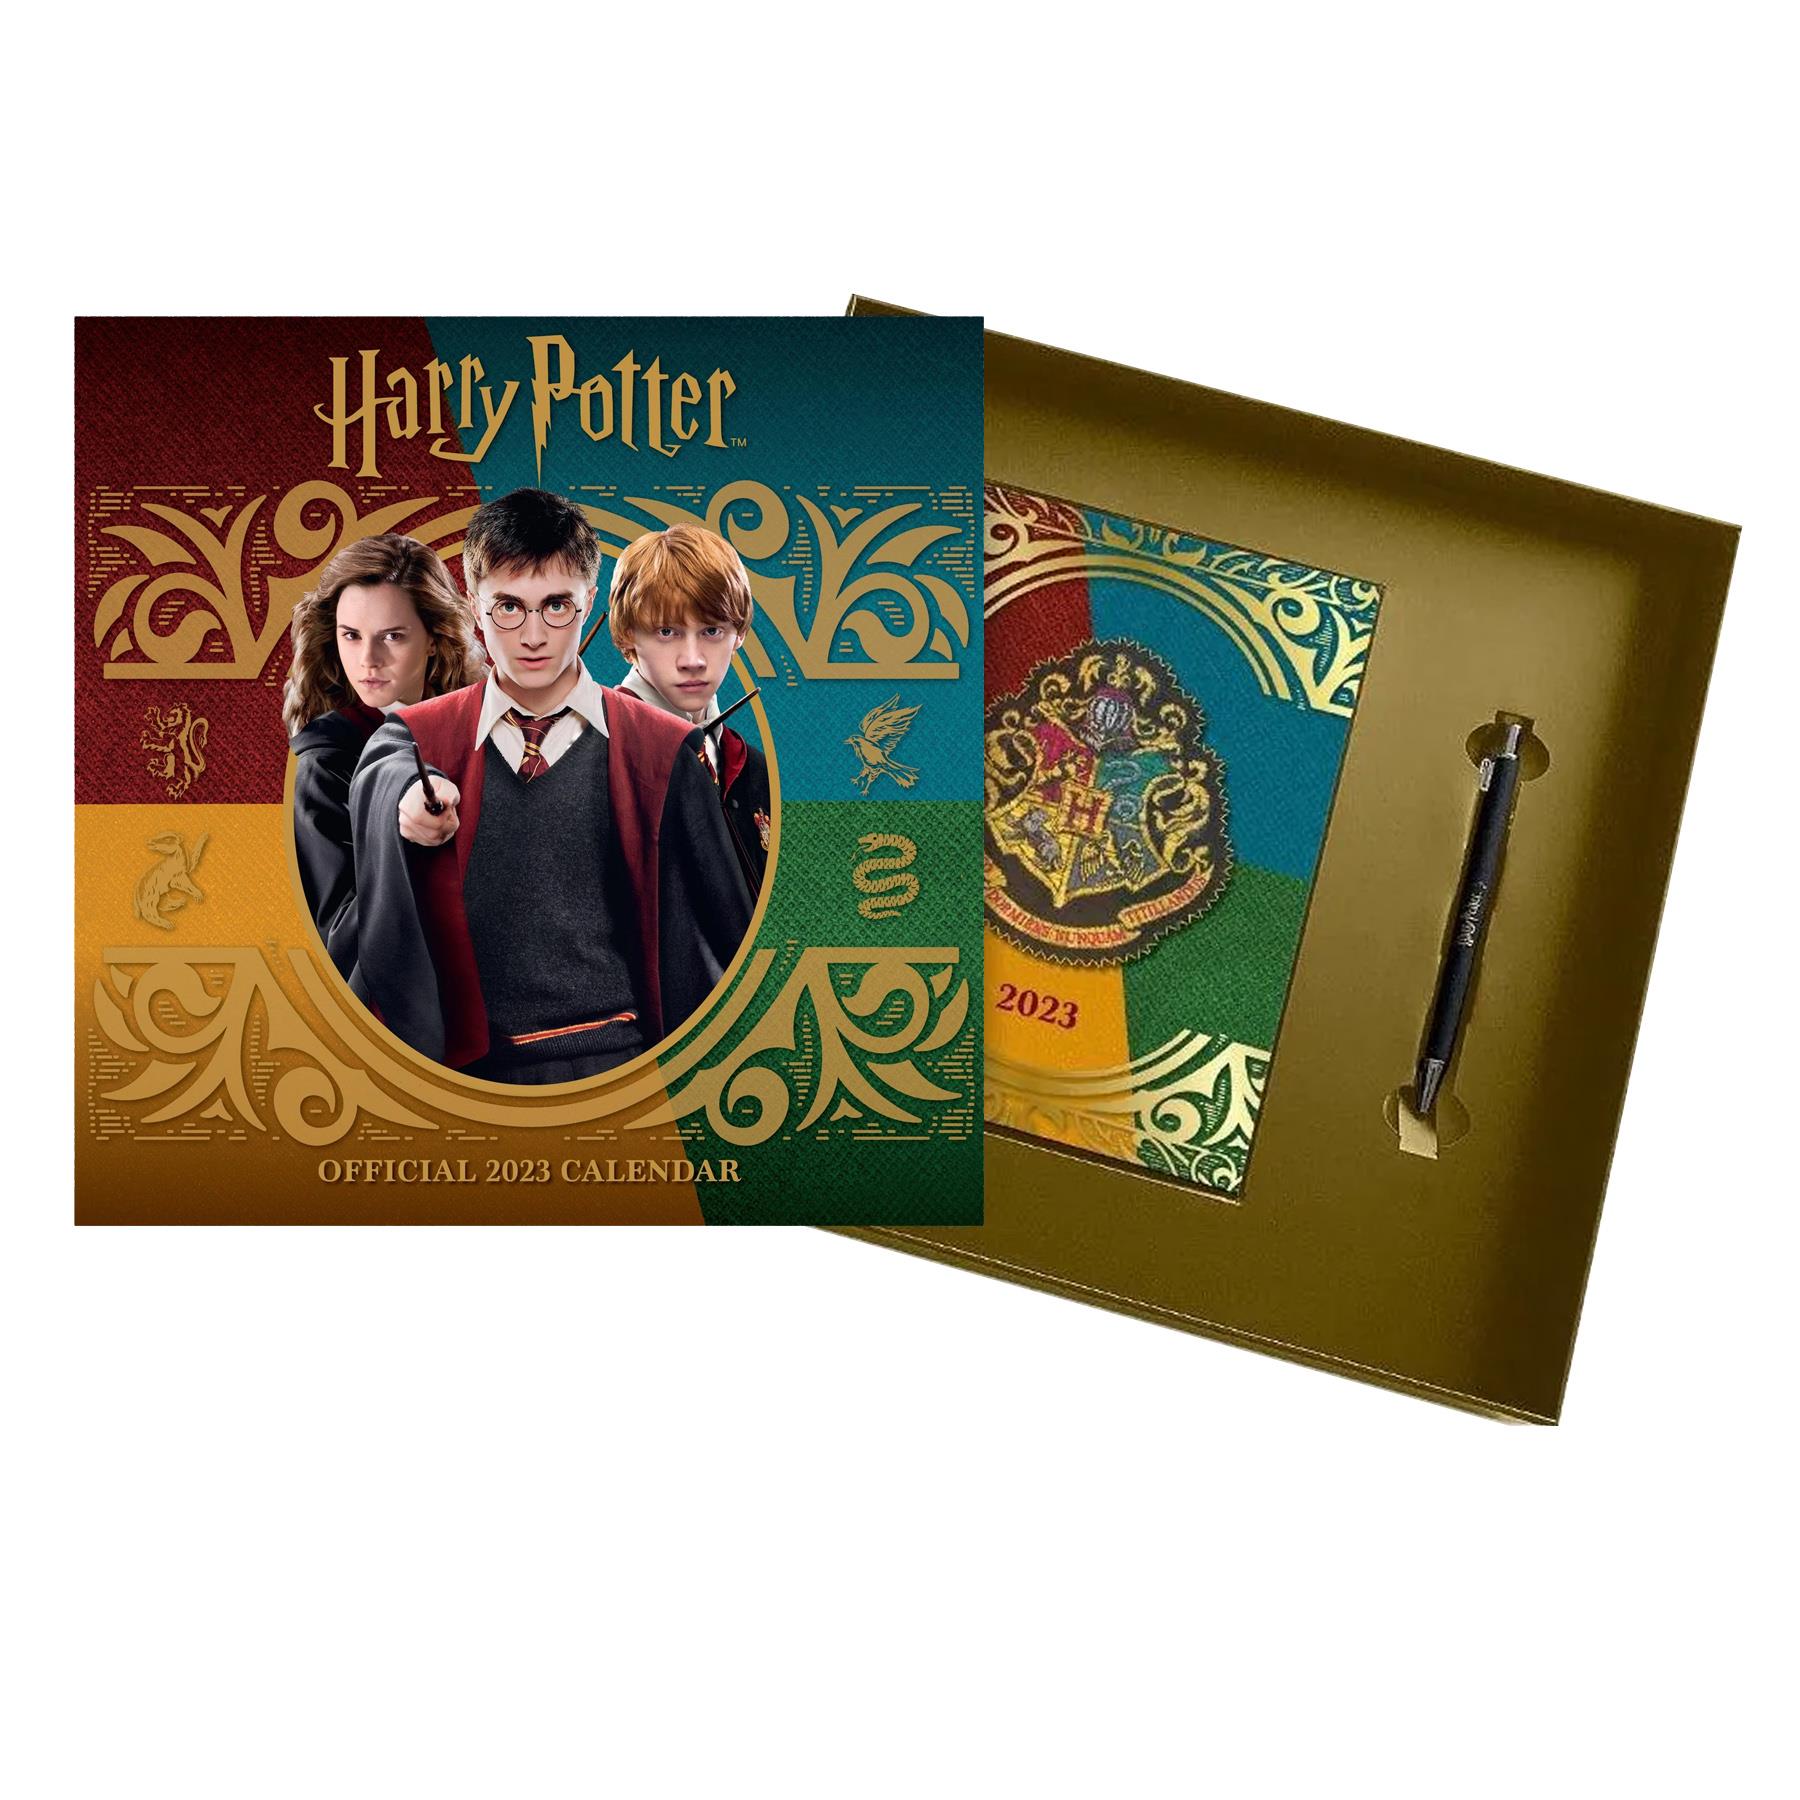 Harry Potter 2023 Calendar Diary and Pen Official Licensed Gift Box Set